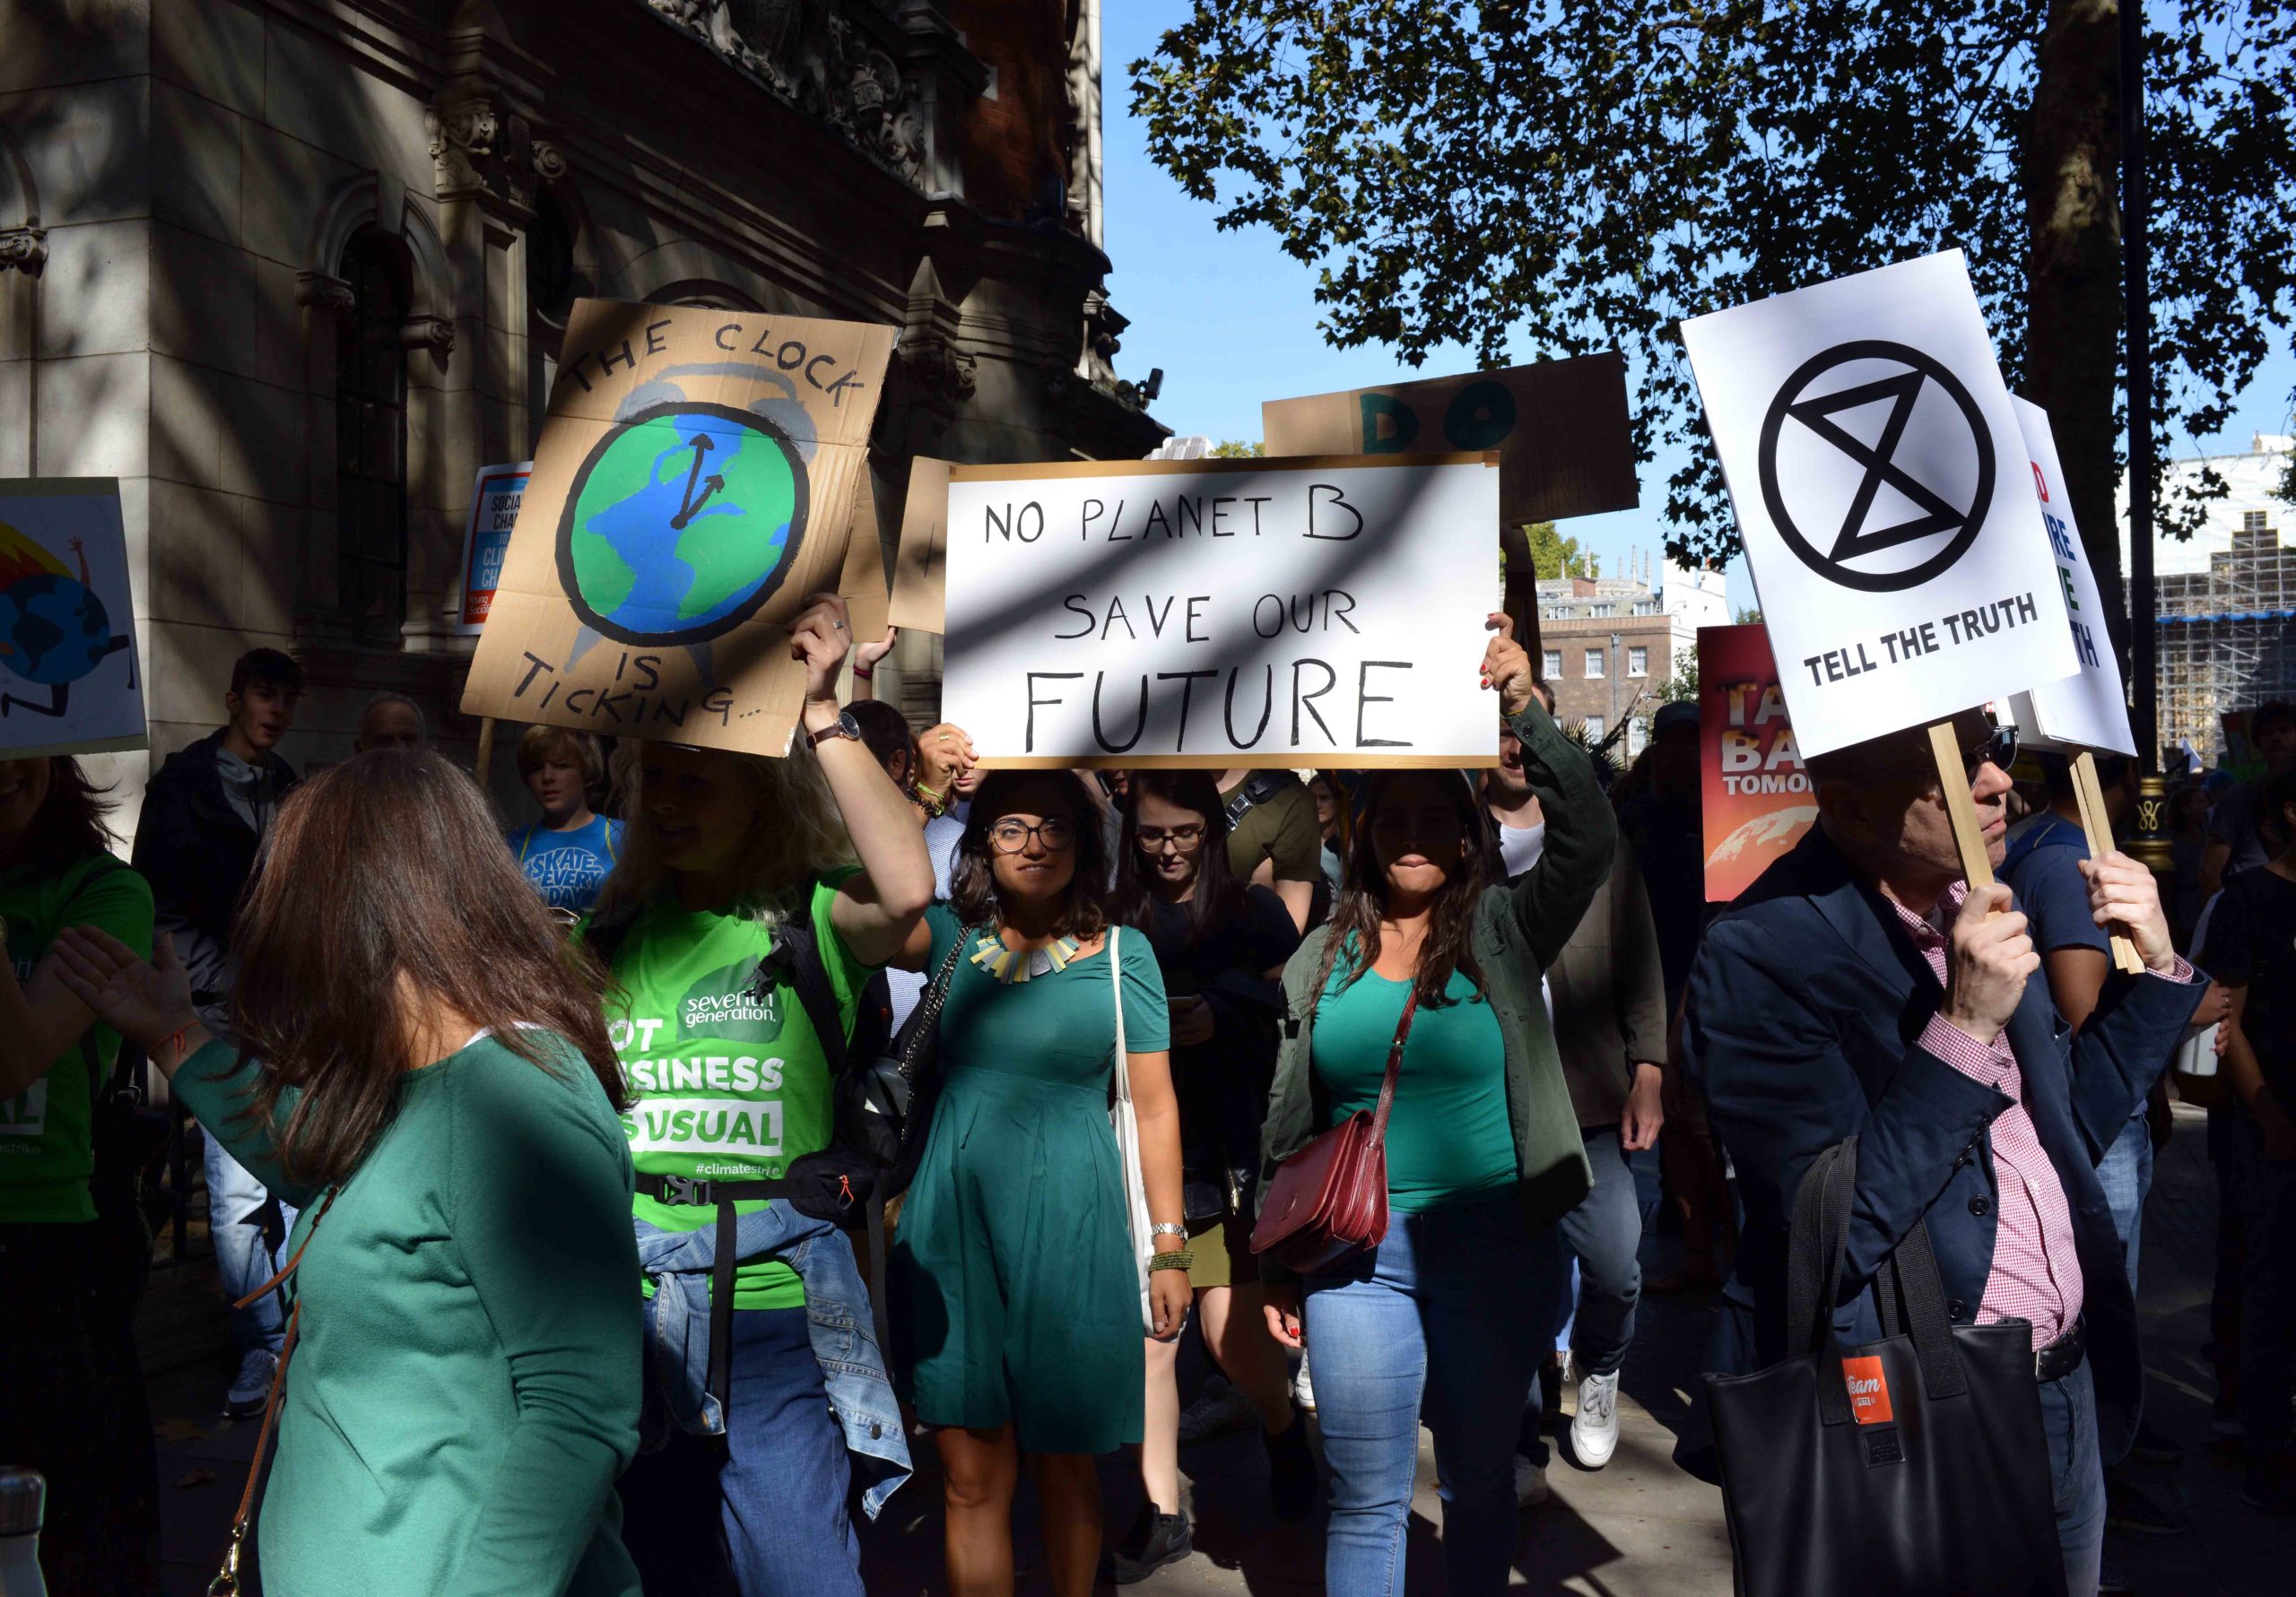 “End of the world, end of the month, same struggle”: class and climate protest in France and the UK